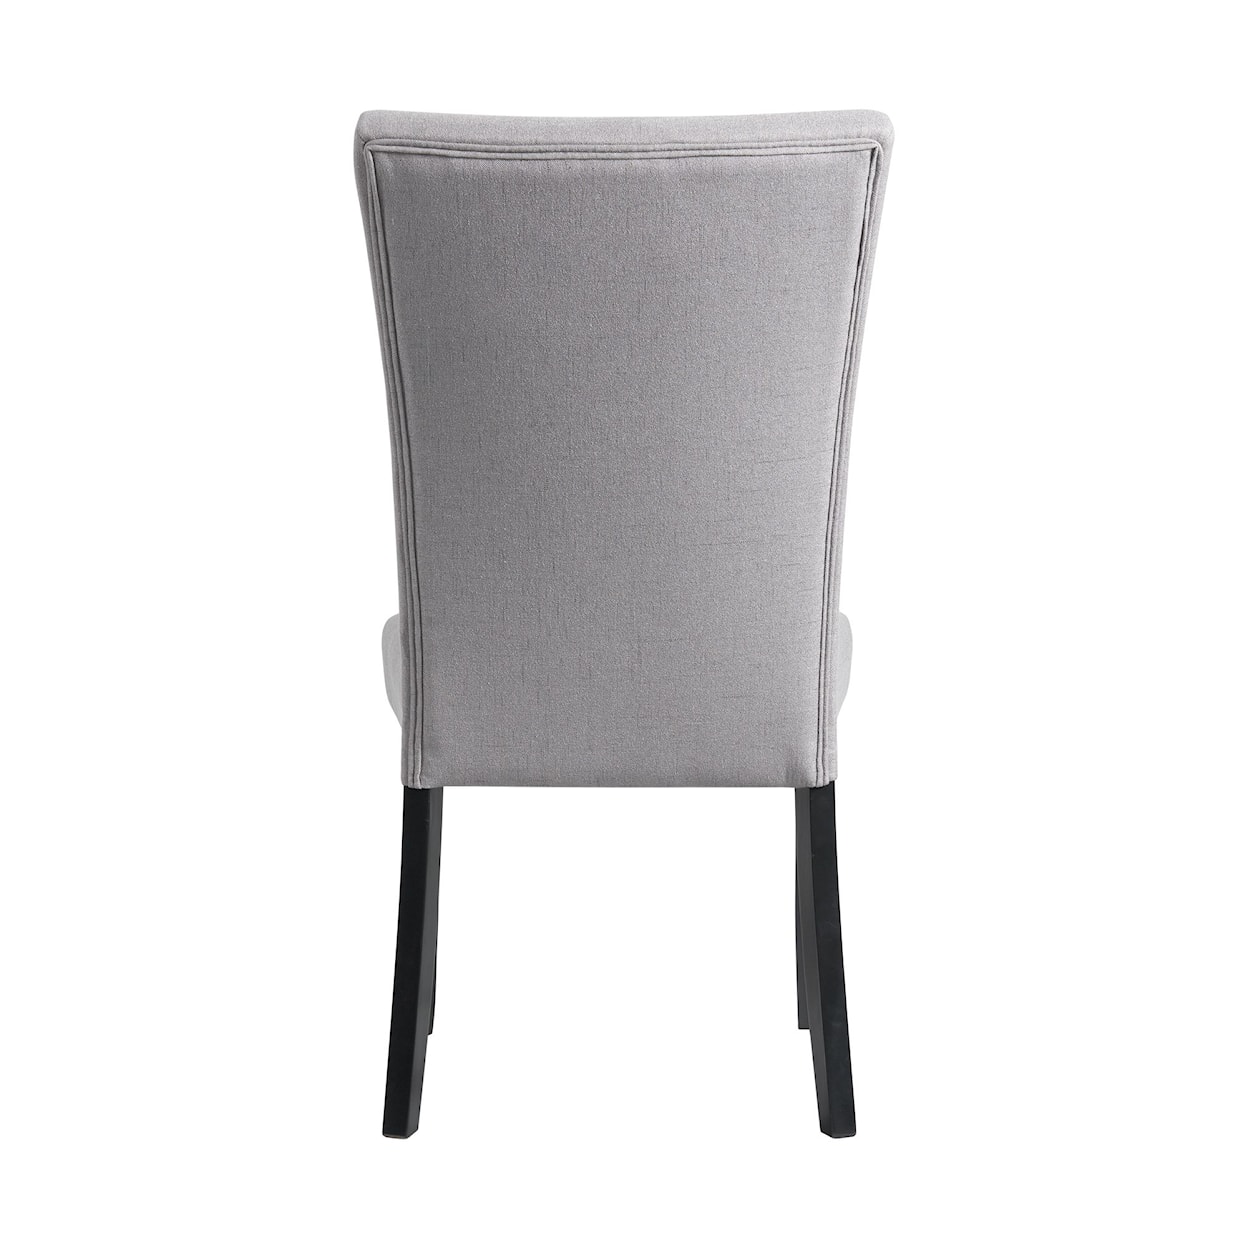 Elements International Beckley Upholstered Dining Chair